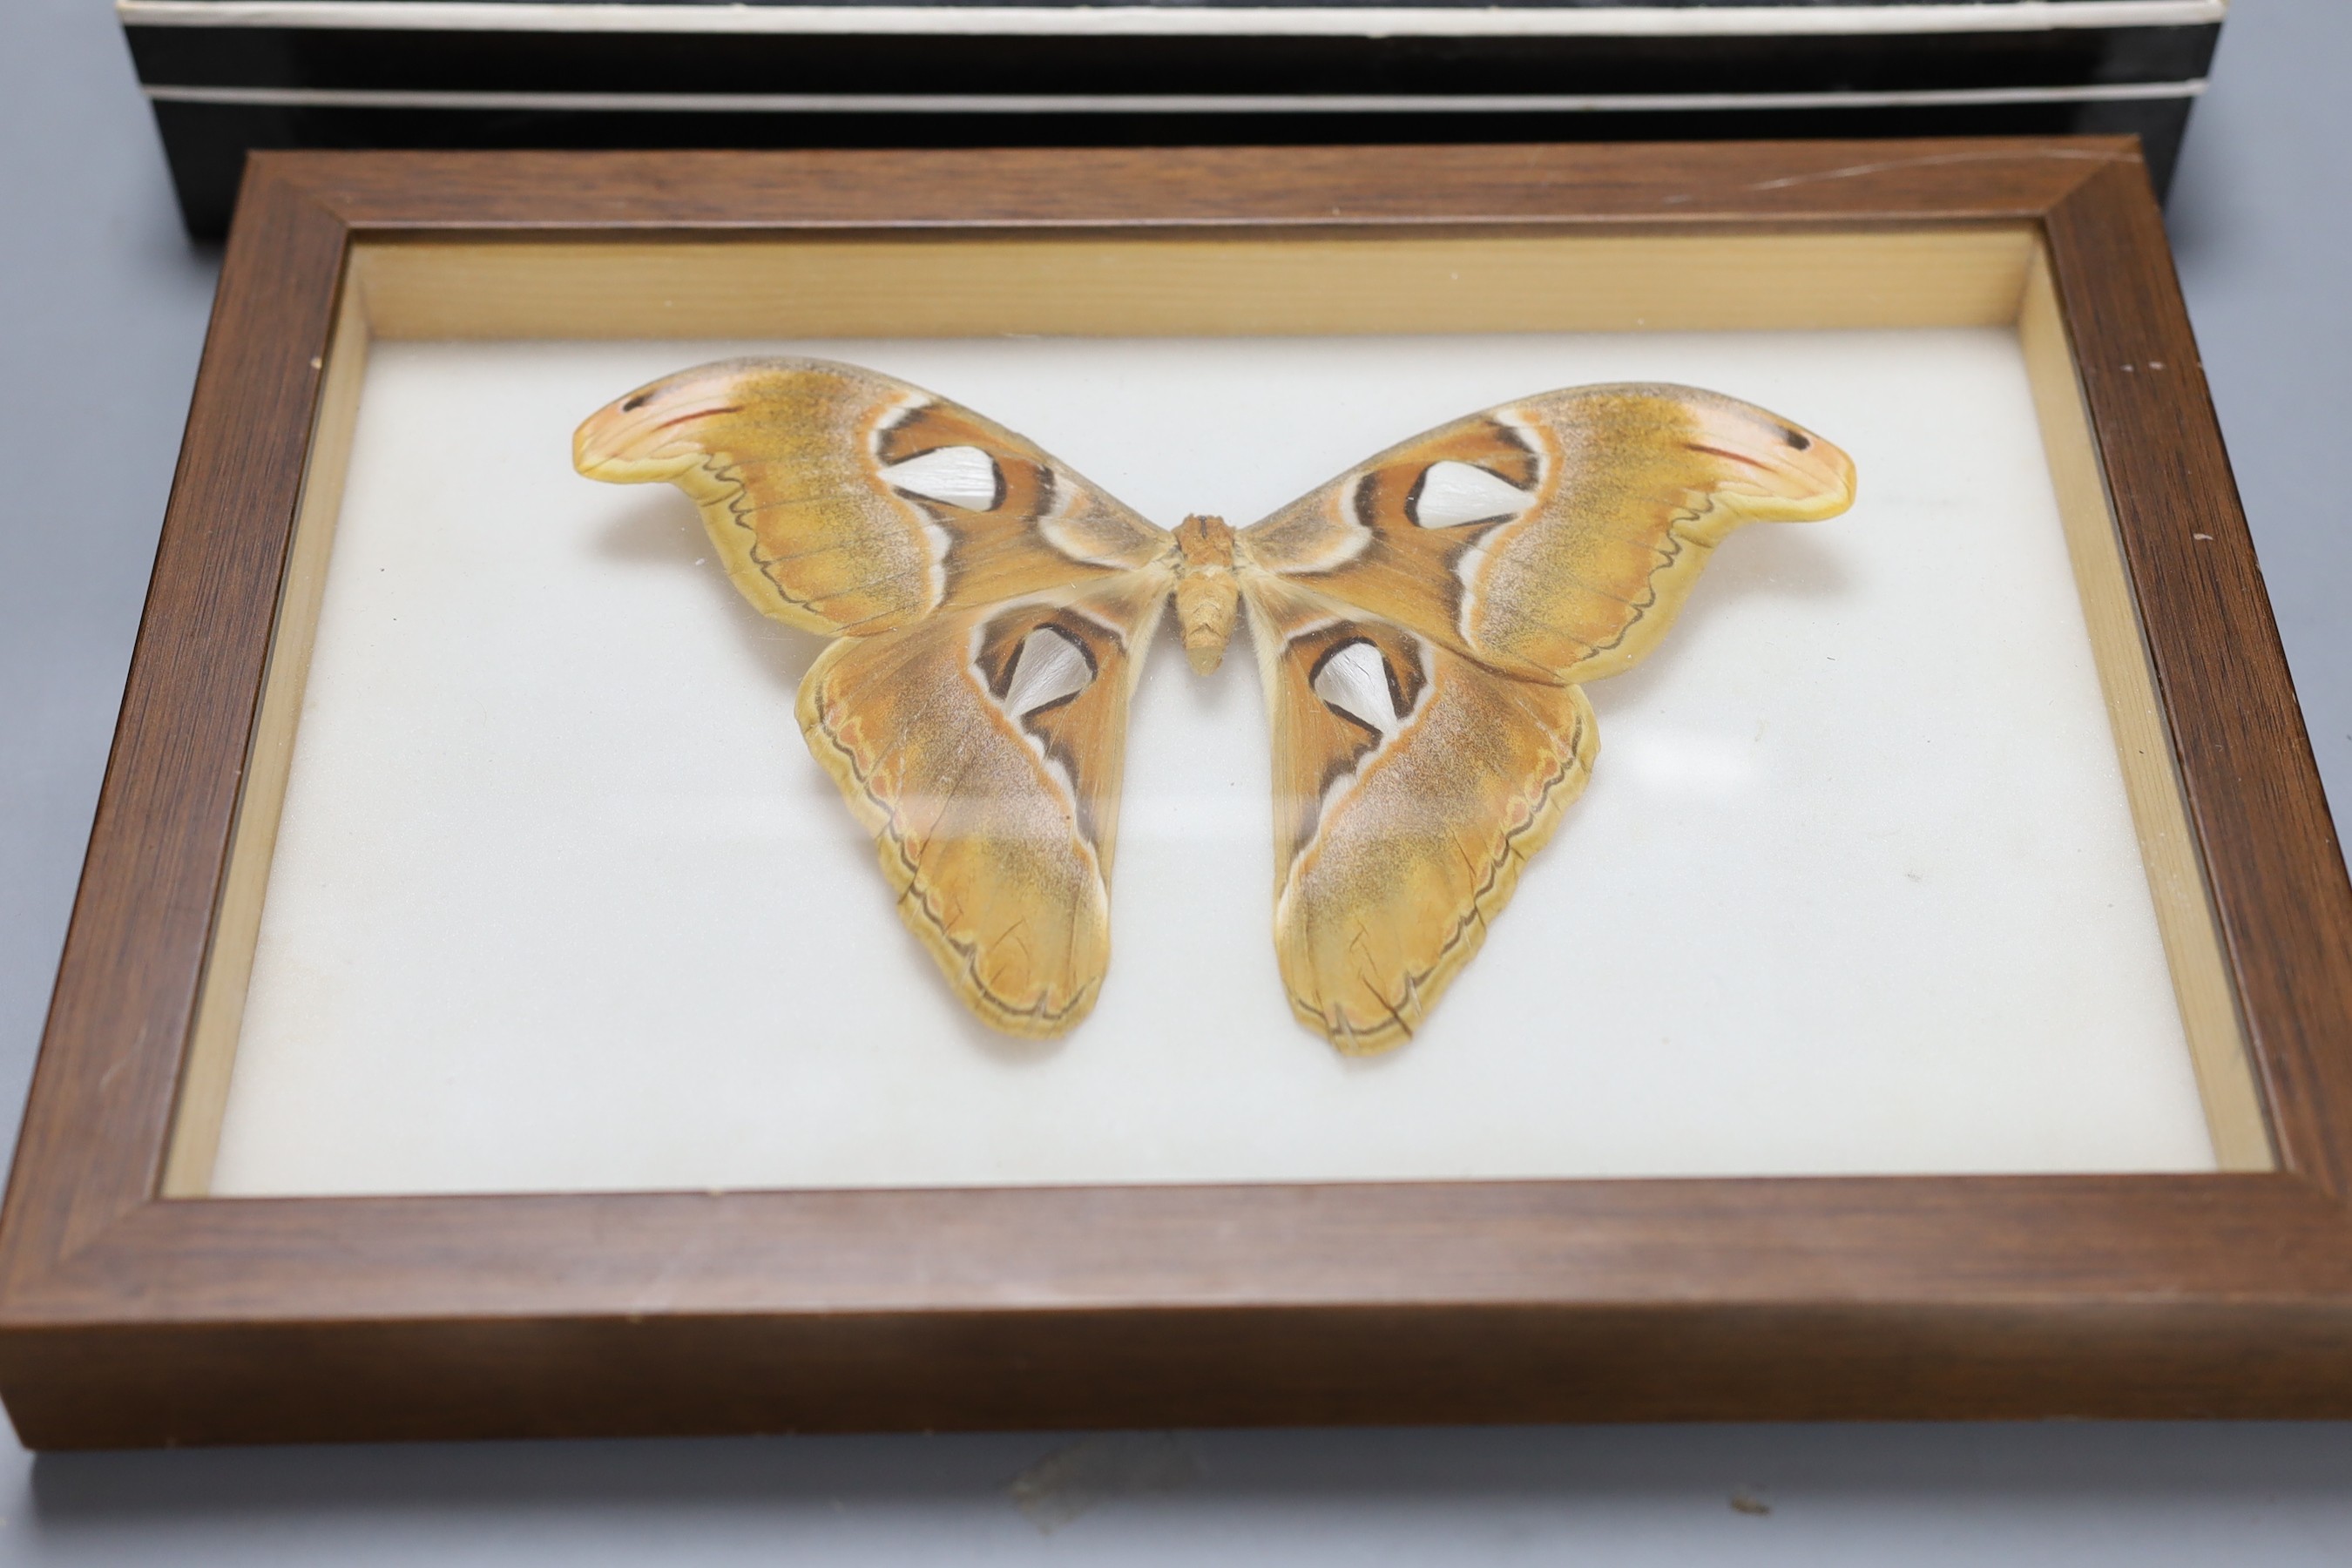 Entomology and Ornithology- beetle, scorpion, cicada, dragonfly etc. specimens in a glazed case, 41 cm wide, skeleton of a pigeon in a glazed box, 36 cm wide and an Atlas moth in a glazed case, 32 cm wide (3)